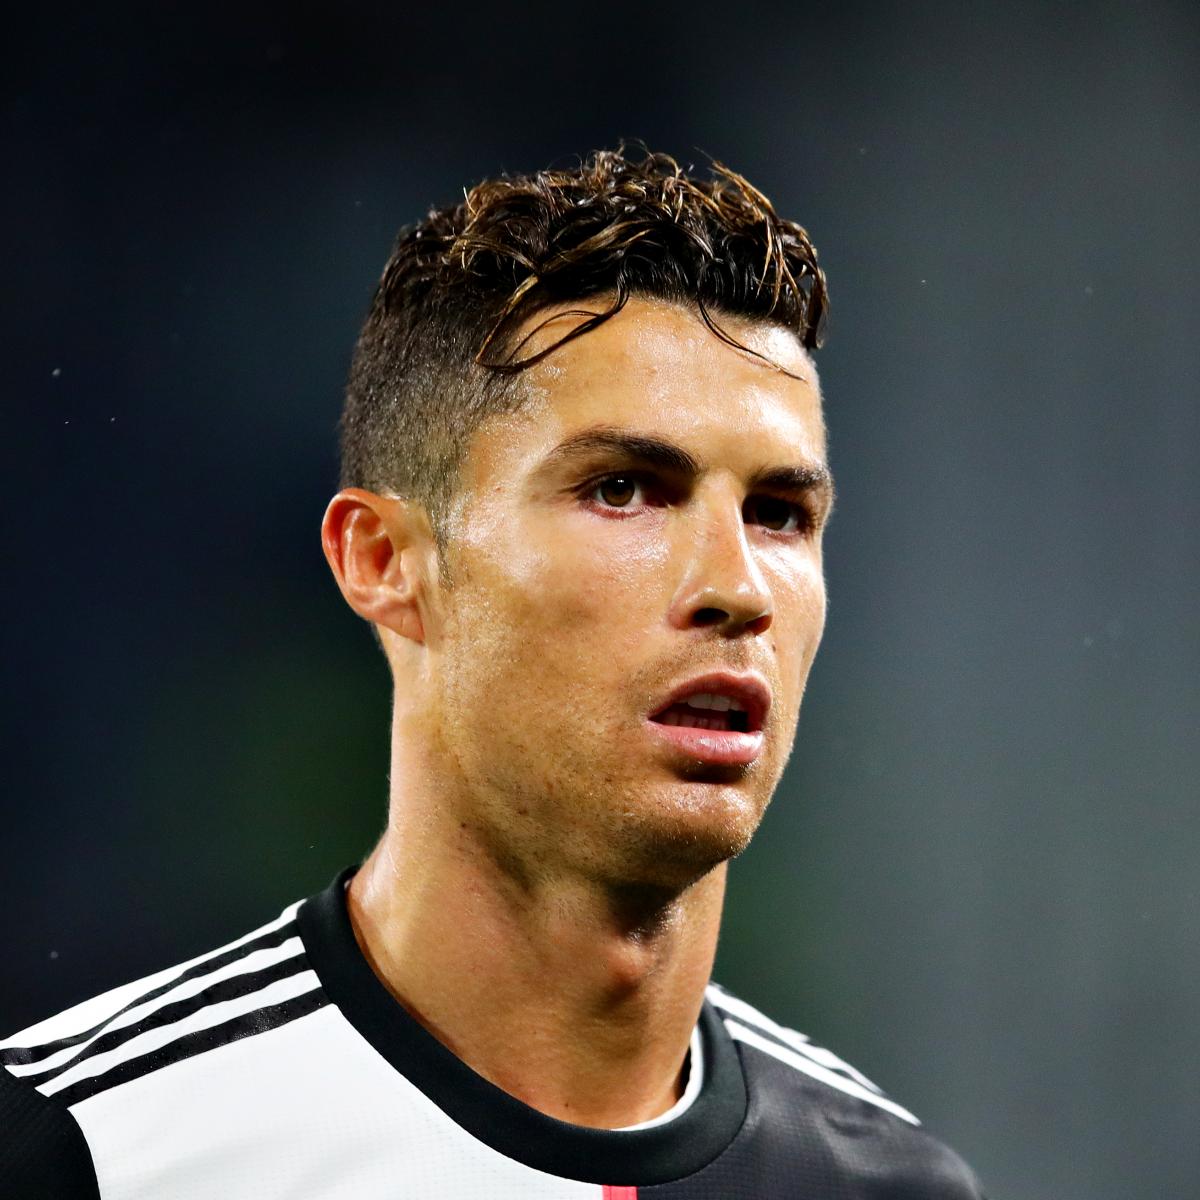 Report: Cristiano Ronaldo to Be Served Rape Case Summons for 2009 Allegations